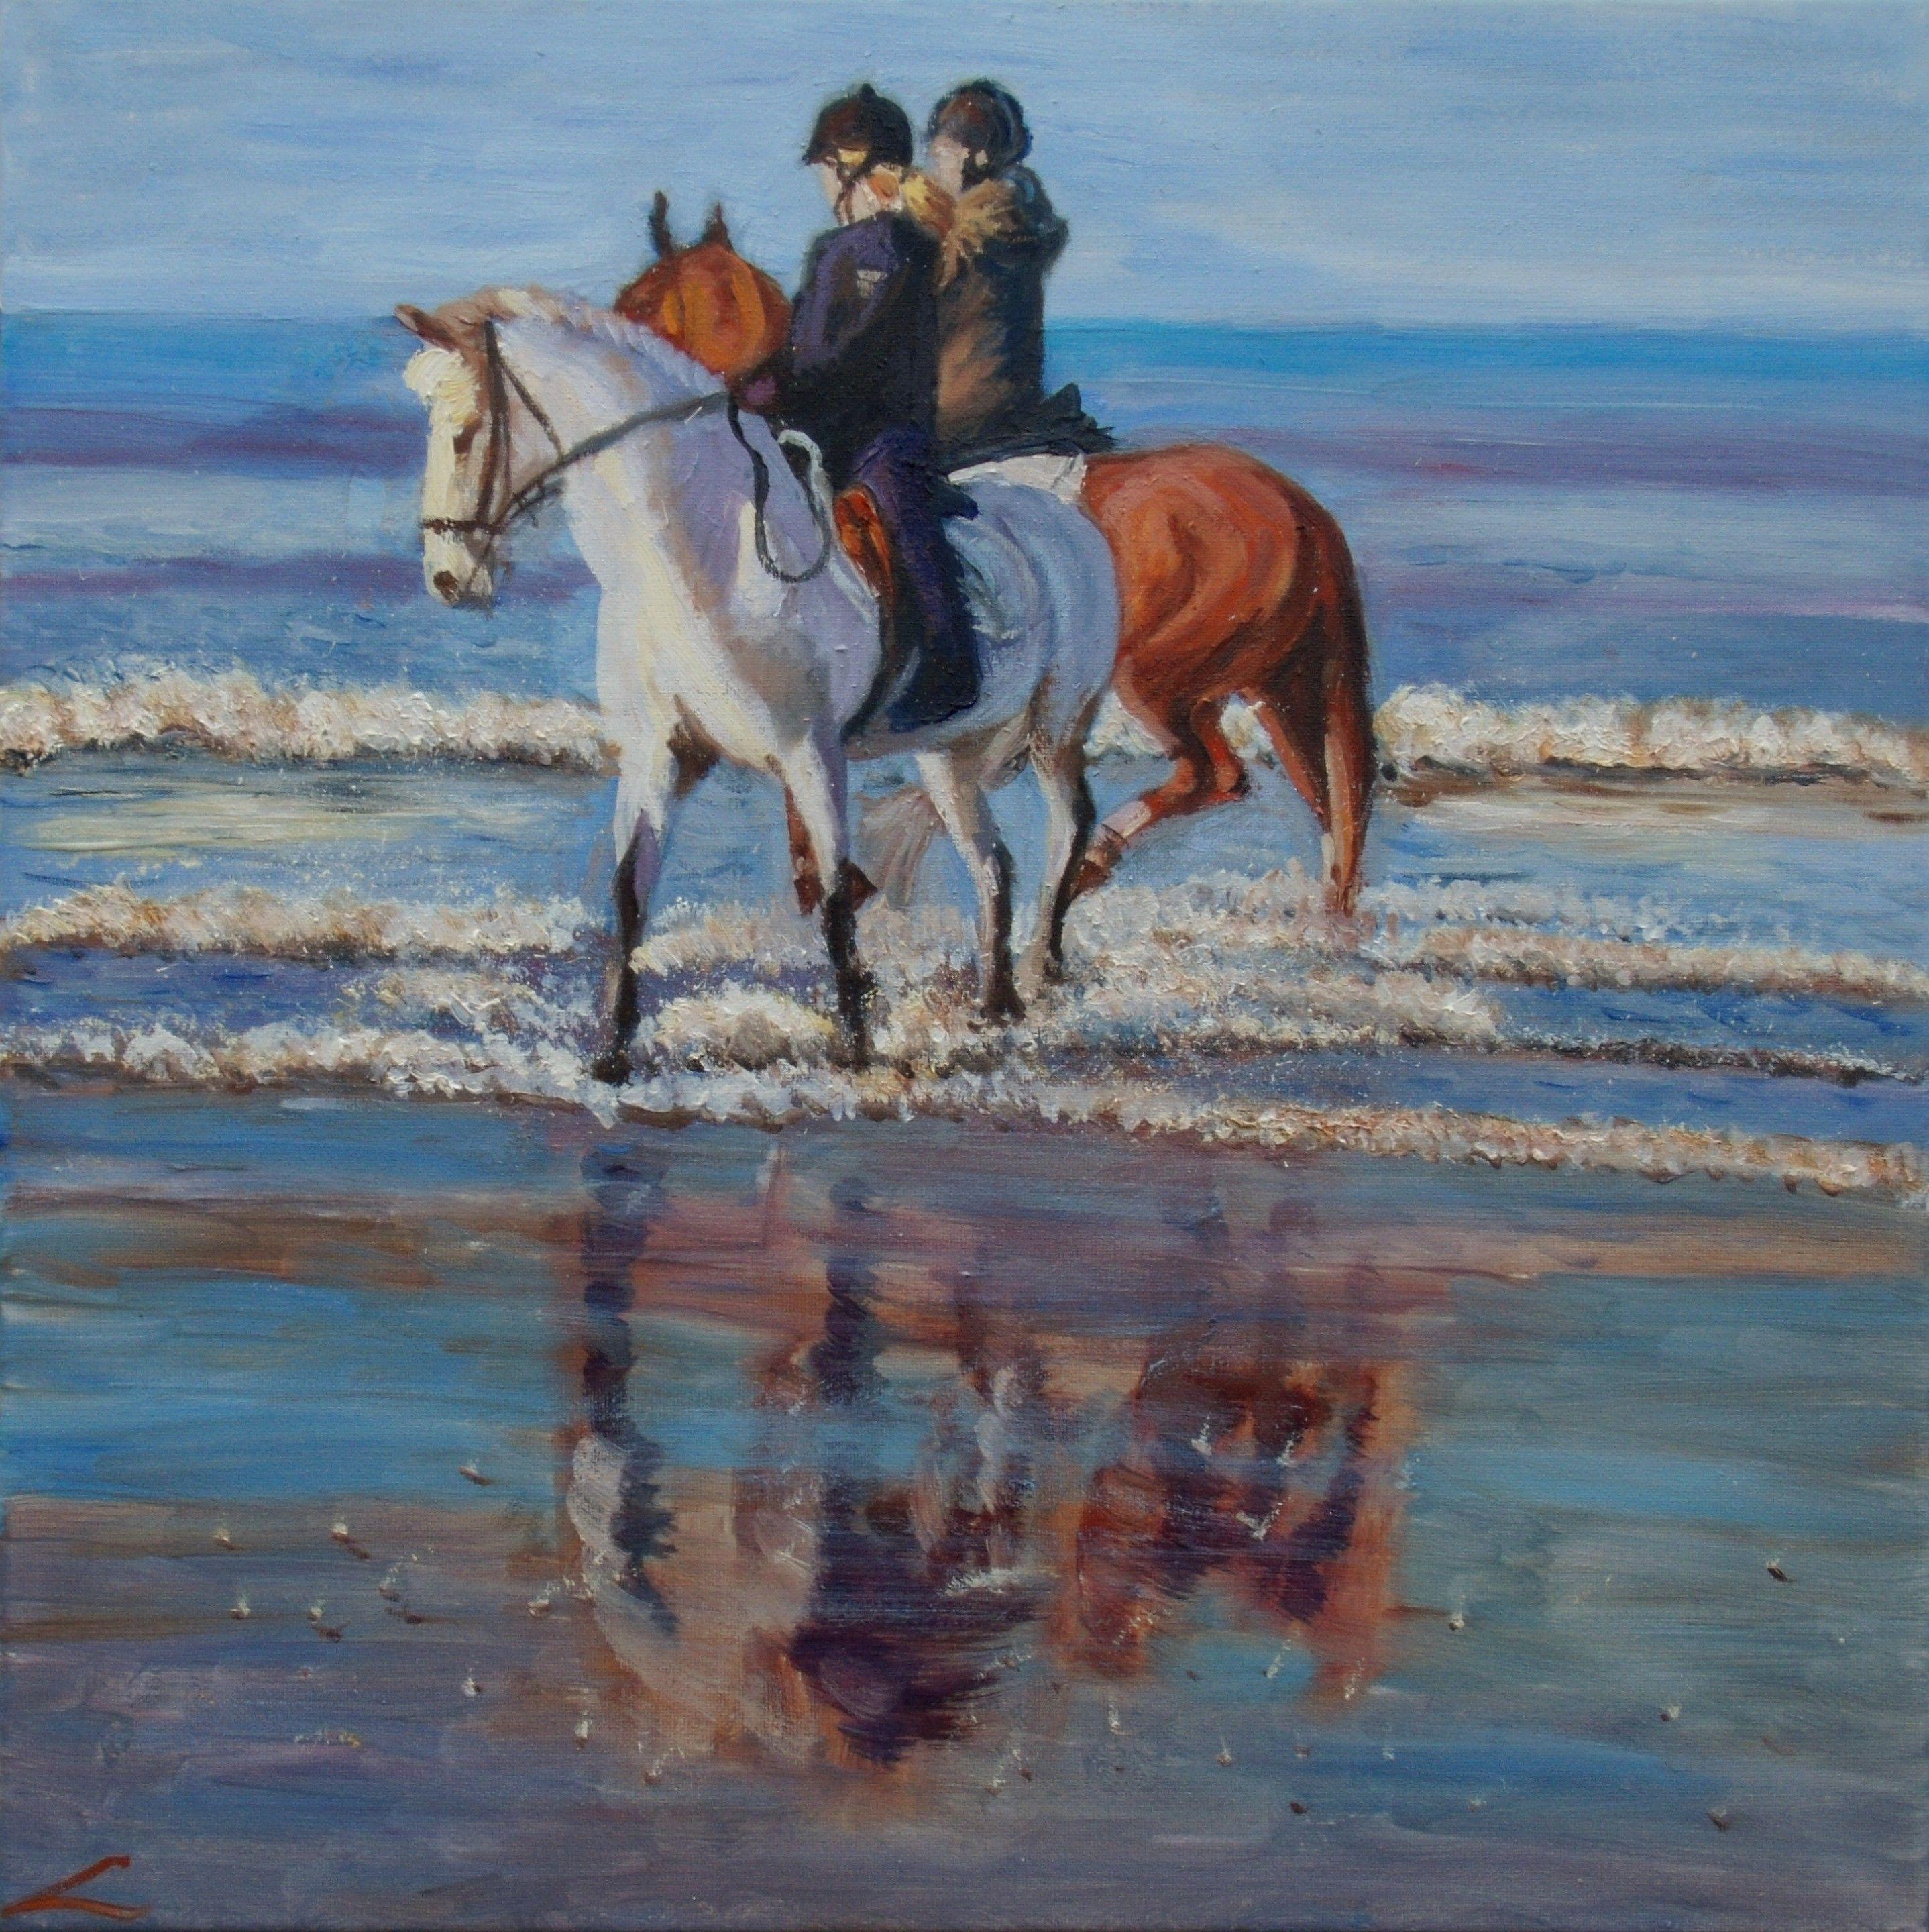 Two girls on horses at the sea.  Alla prima oil painting with few final tuch when dry.Water right by the edge of the shore. Waves crashing at my feet. Beautiful weather with a big shining sun. And Iâ€™m standing there taking it all in.  :: Painting